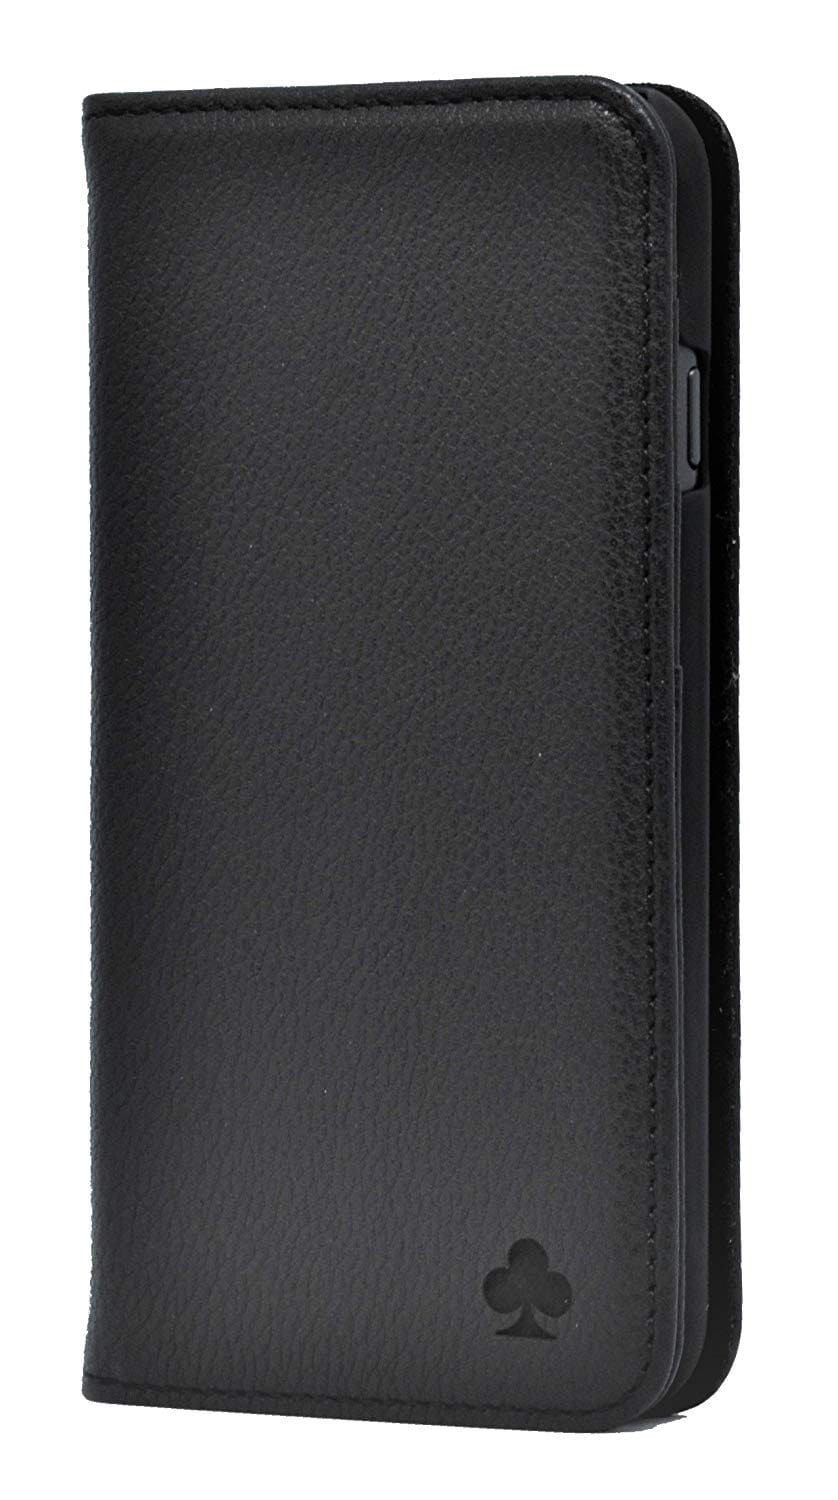 Samsung Galaxy S8 Leather Case. Premium Slim Genuine Leather Stand Case/Cover/Wallet (Black)